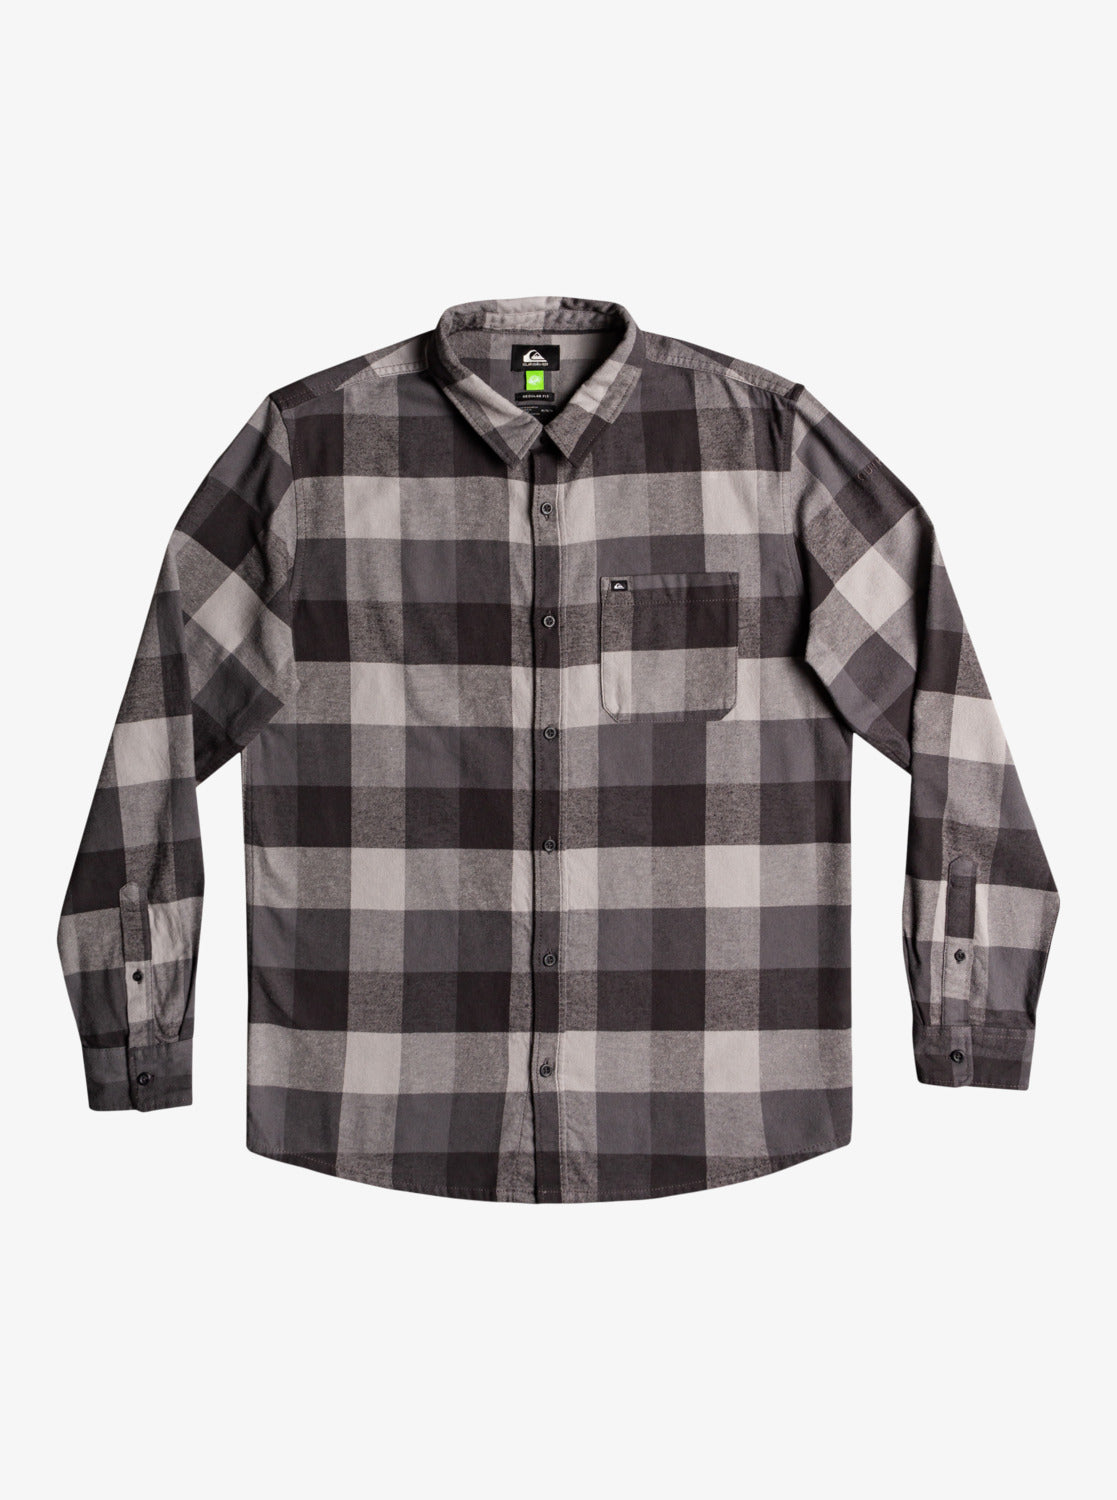 Motherfly Long Sleeve Flannel Shirt